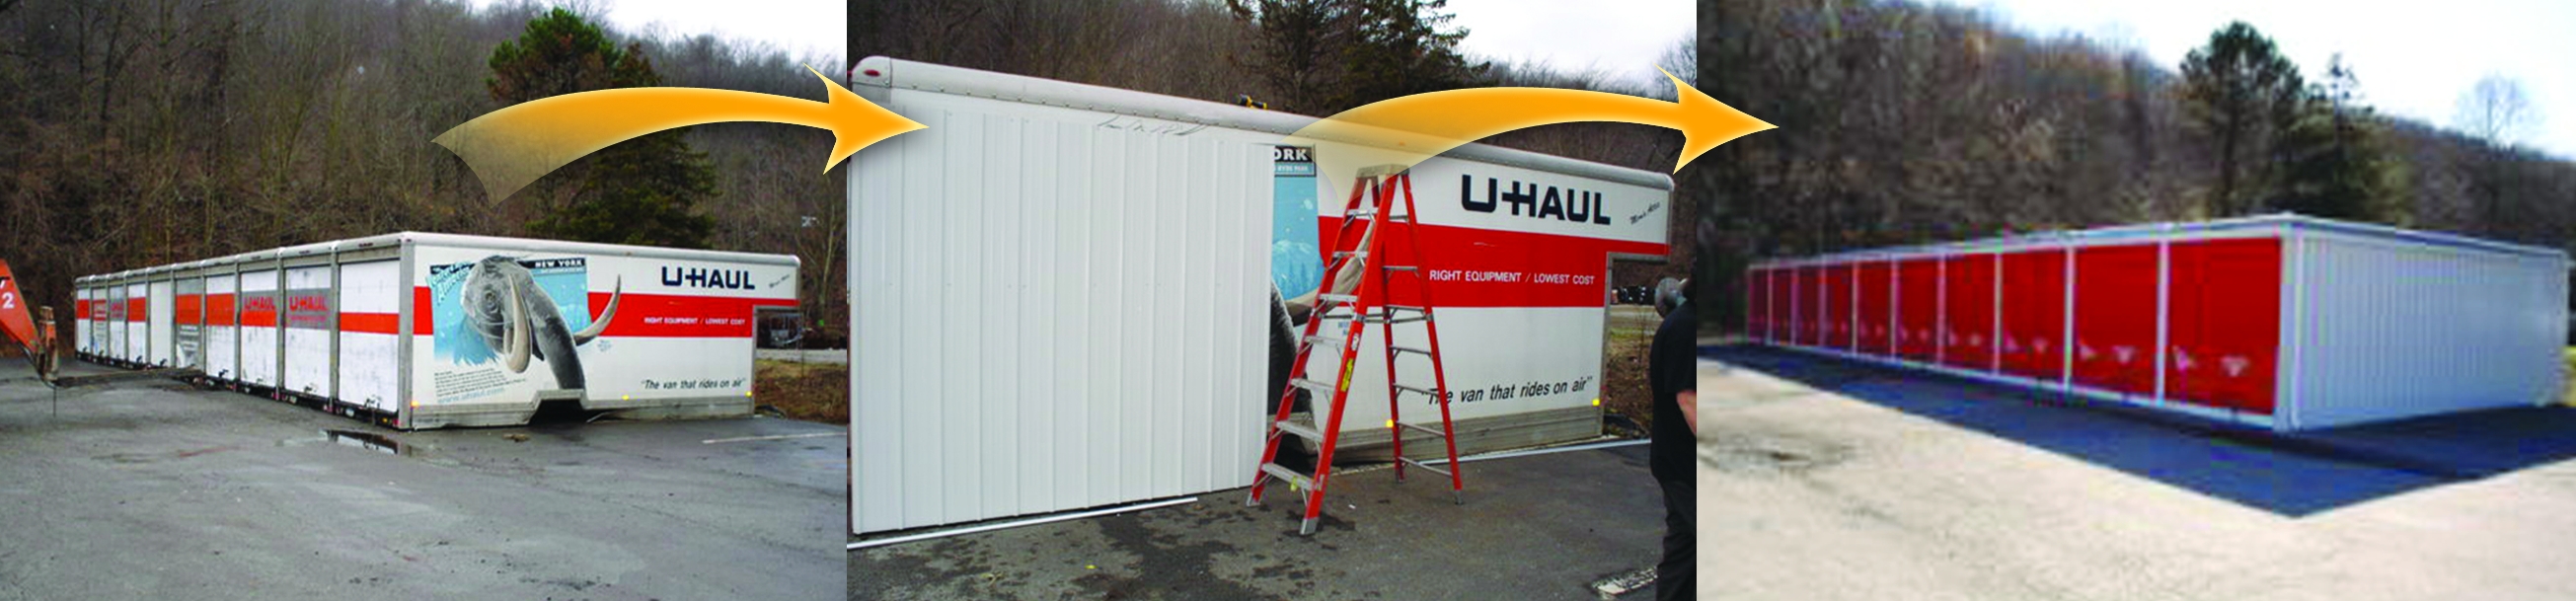 Reuse at U-Haul – Truck Bodies Given 2nd Life